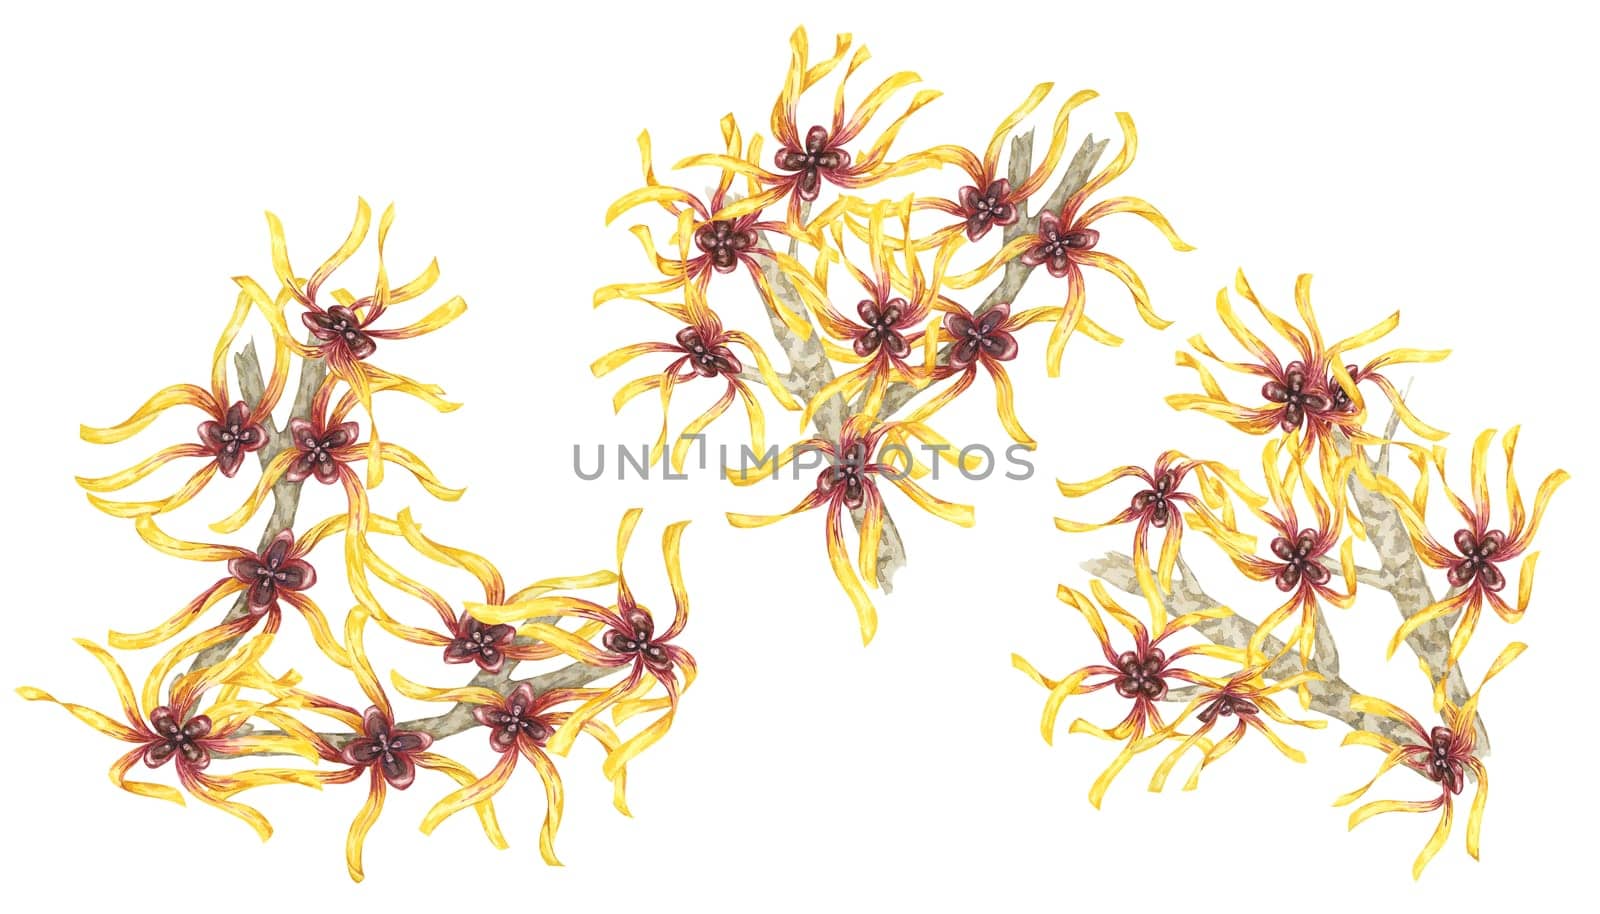 Witch hazel flowers on tree branch set of cliparts. Hamamelis virginiana twigs. Watercolor illustration for cosmetics, water, herbal medicine cream packaging, gel, ointment, national day flyer, logo